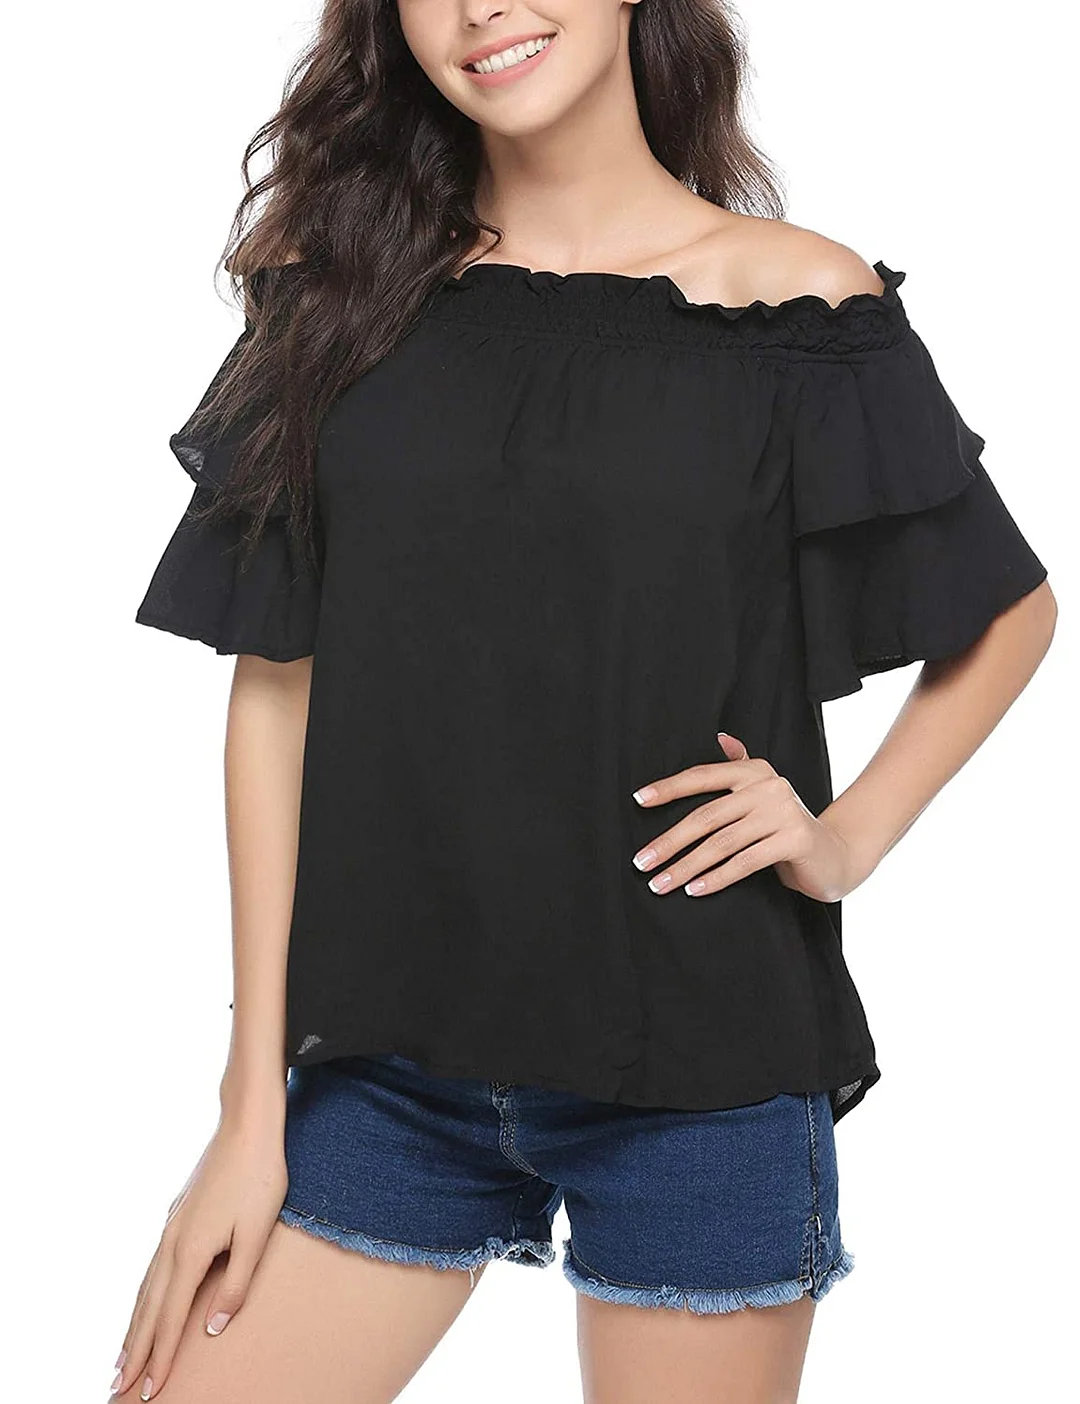 Women's Off Shoulder Bell Sleeve Shirt Casual Loose Chiffon Blouses Sexy Tops